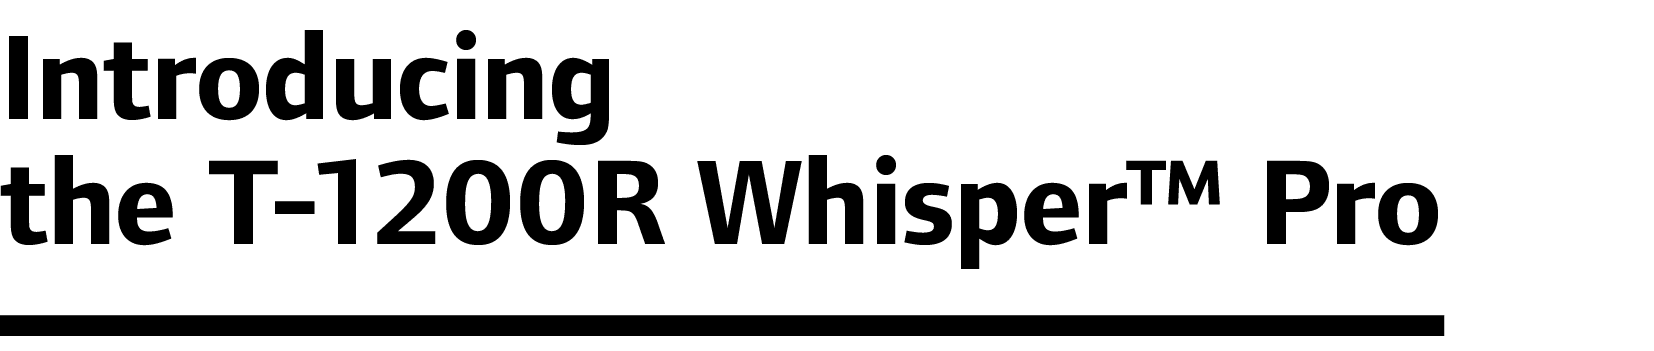 Introducing the T-1200R Whisper™ Pro